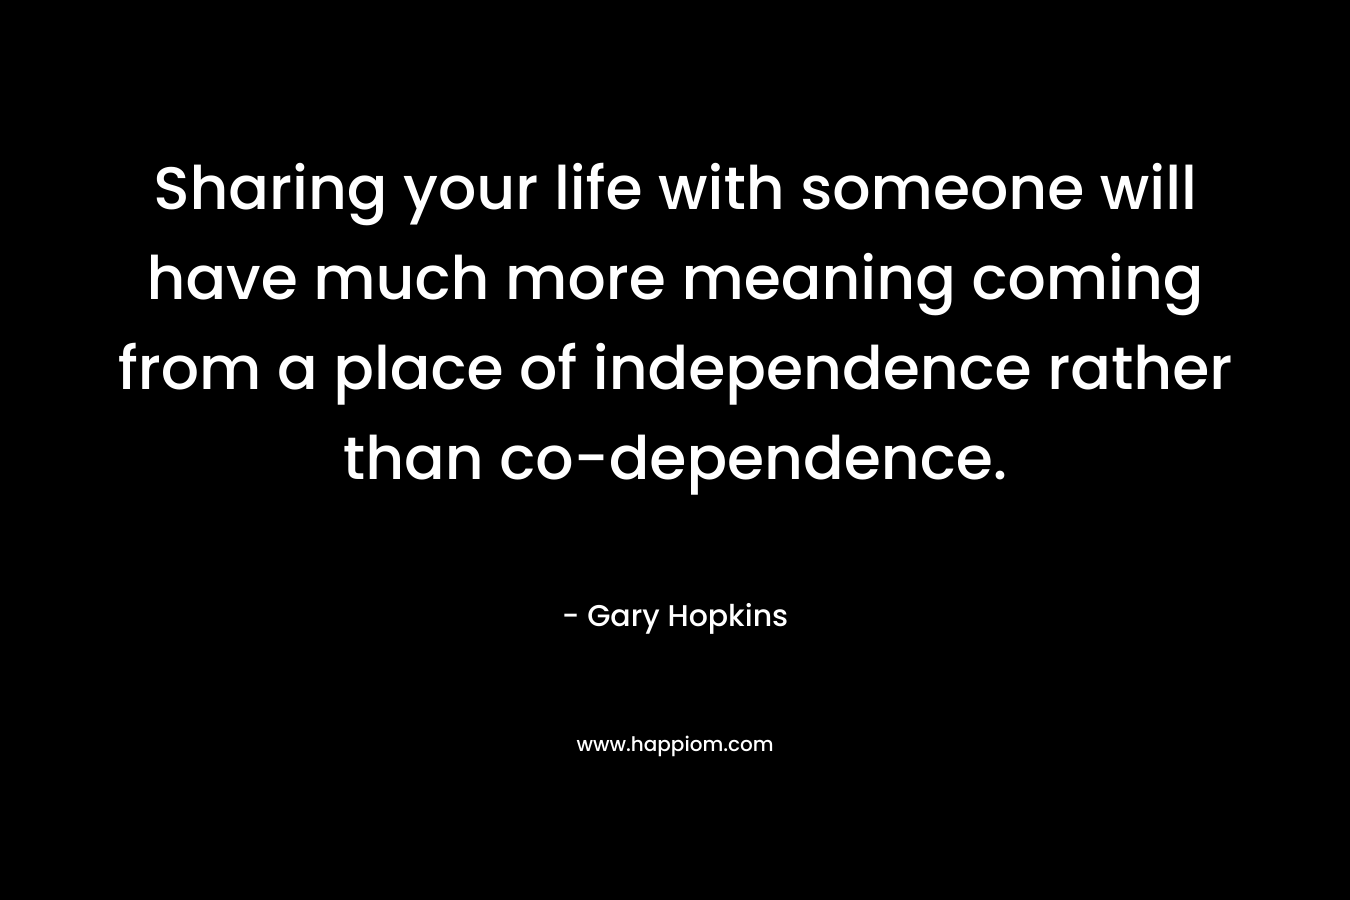 Sharing your life with someone will have much more meaning coming from a place of independence rather than co-dependence.